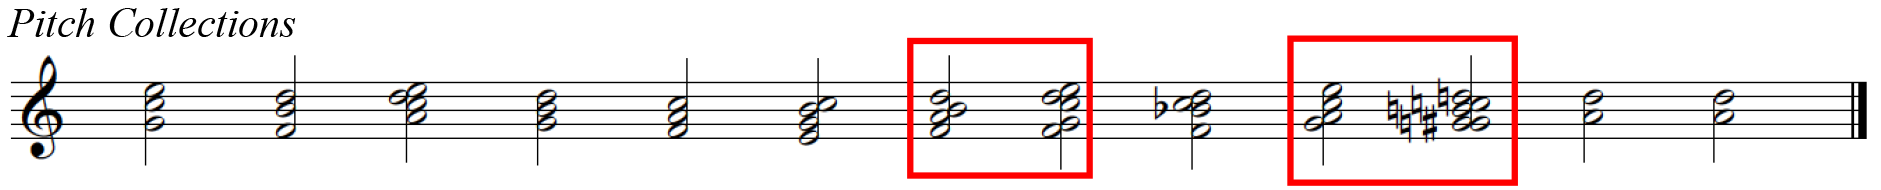 A staff with a treble clef. Two portions of music are specifically identified within the staff. More in description below.